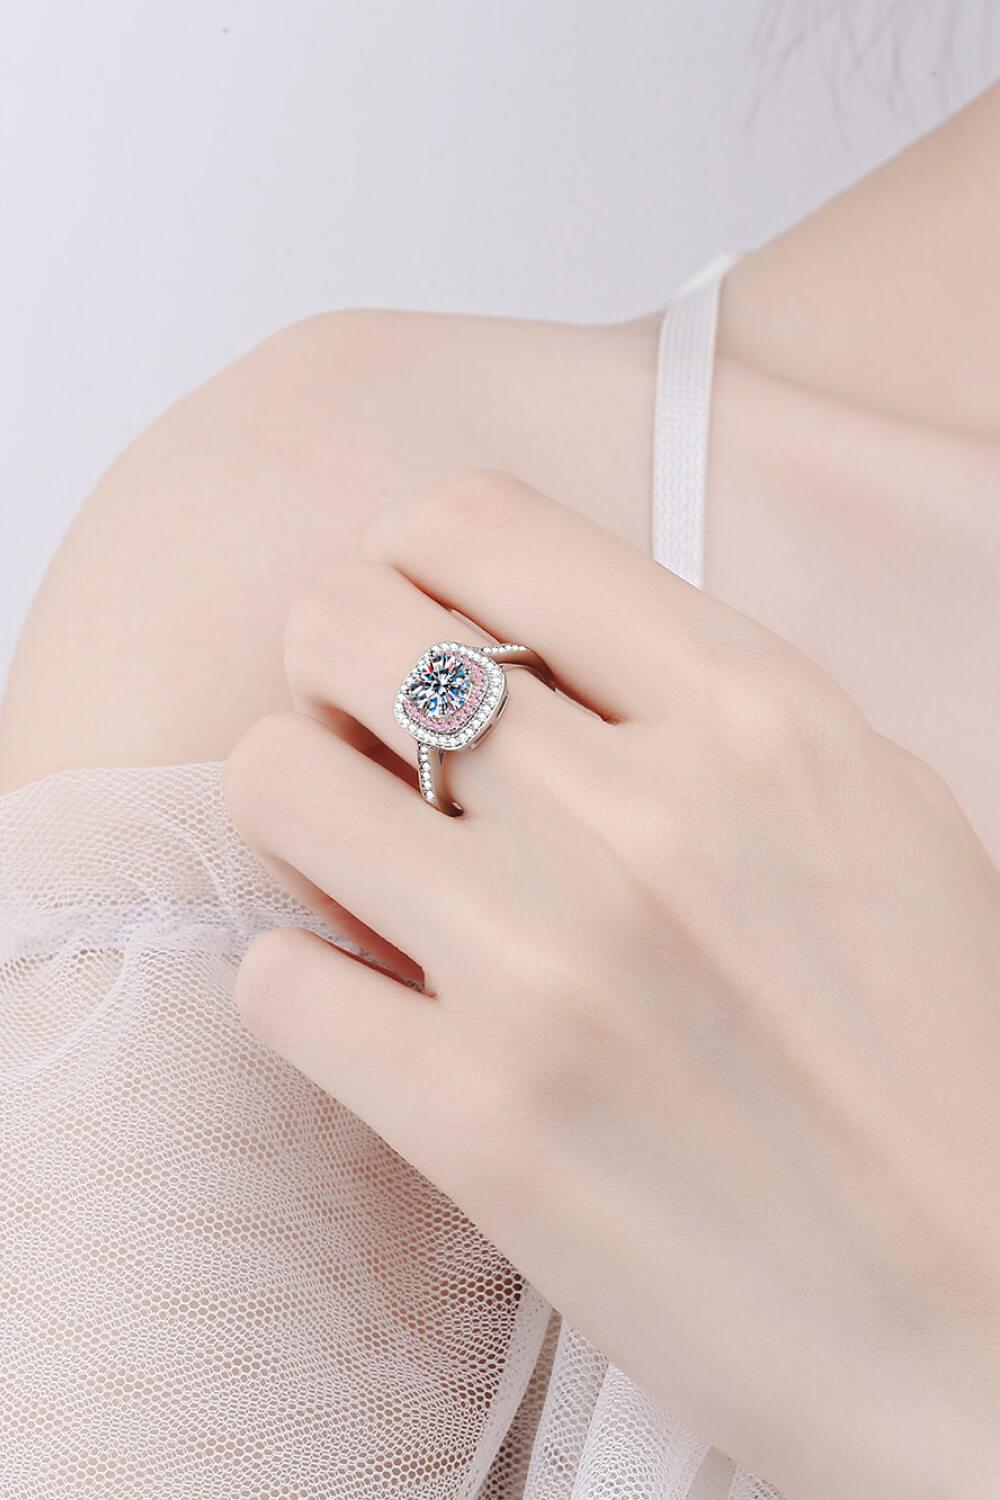 Need You Now Moissanite Ring BLUE ZONE PLANET